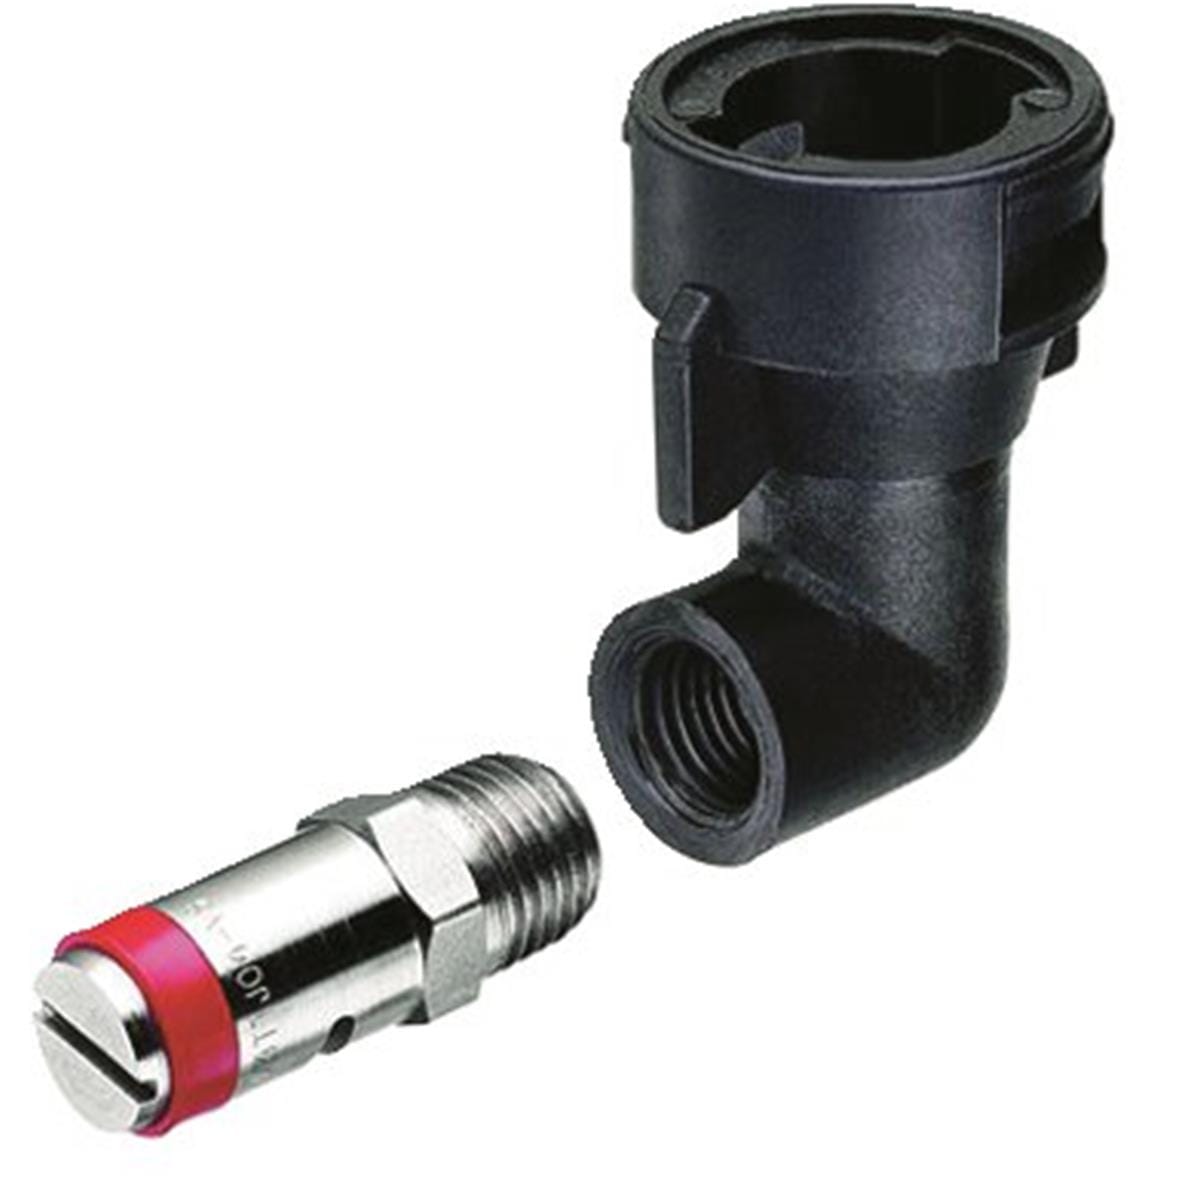 90° Fitting for TurfJet Wide-angle Flat Fan Spray Nozzles QJ4676-90-1/4-NYR